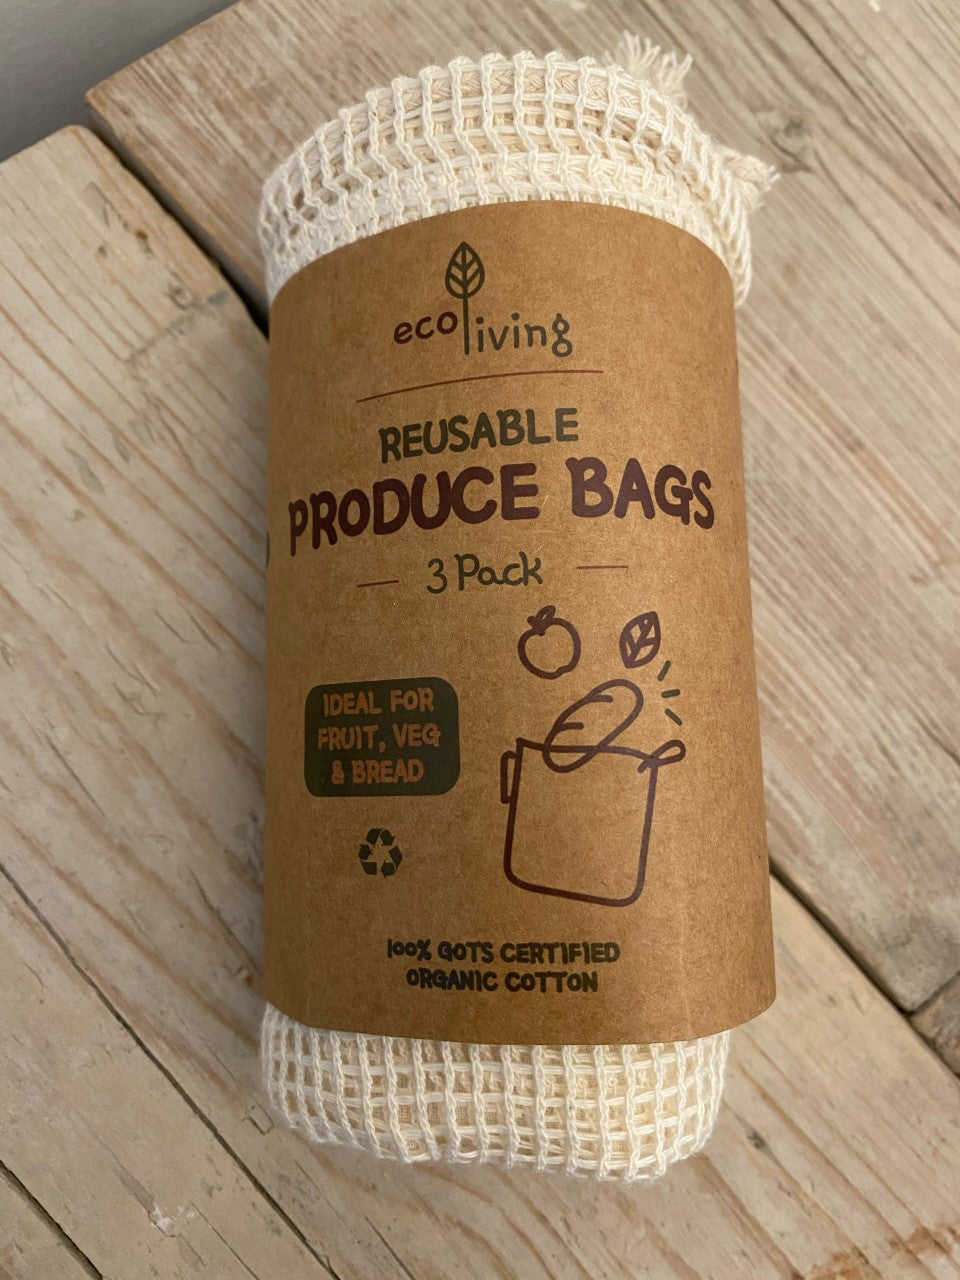 eco living - organic produce bags and bread bag (3 pack)